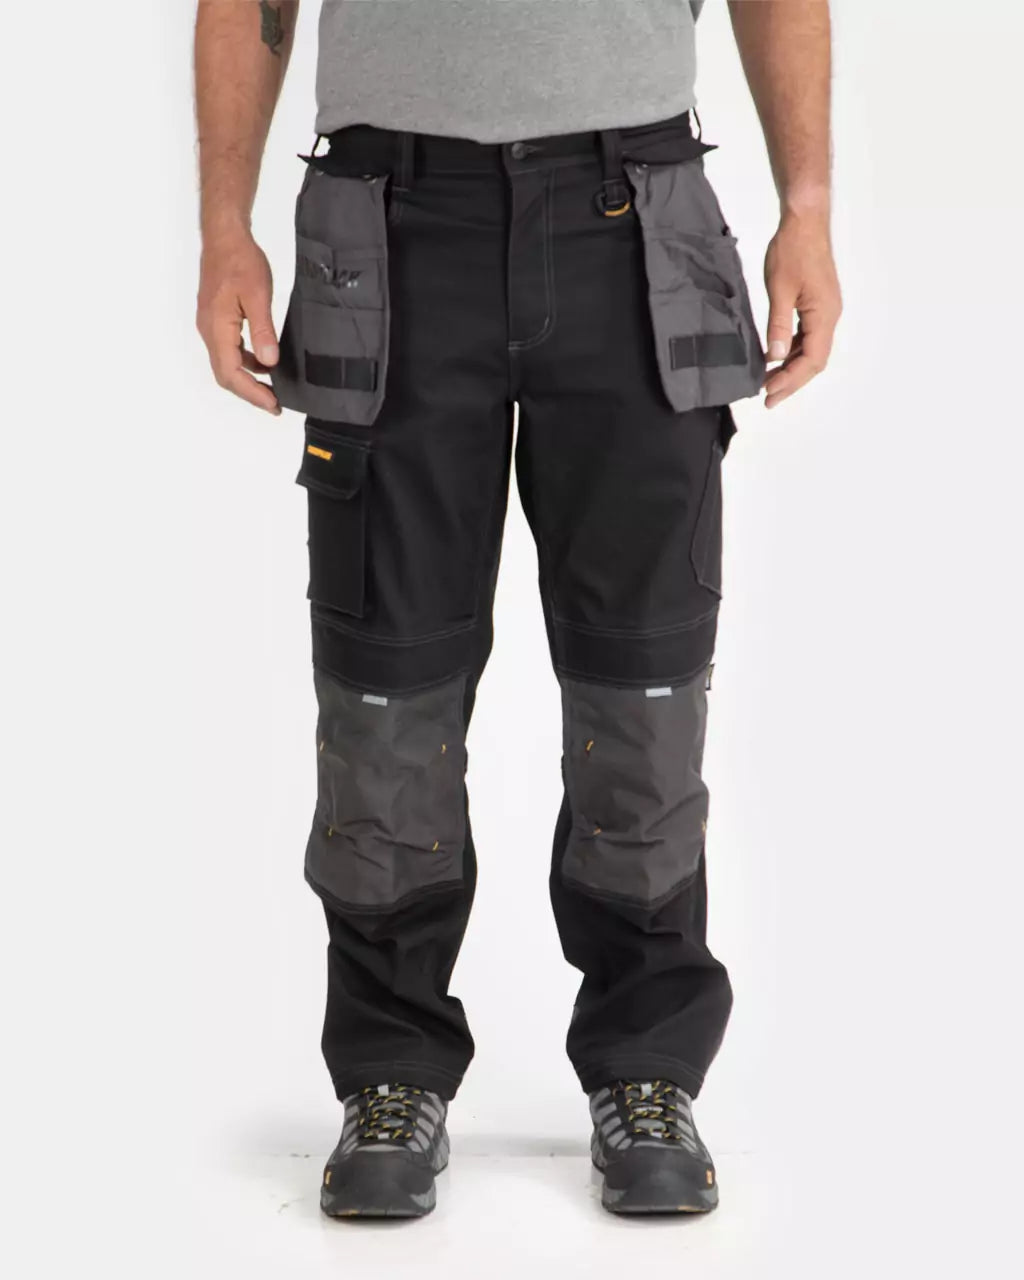 Men's poly cotton utility cargo pants in navy blue